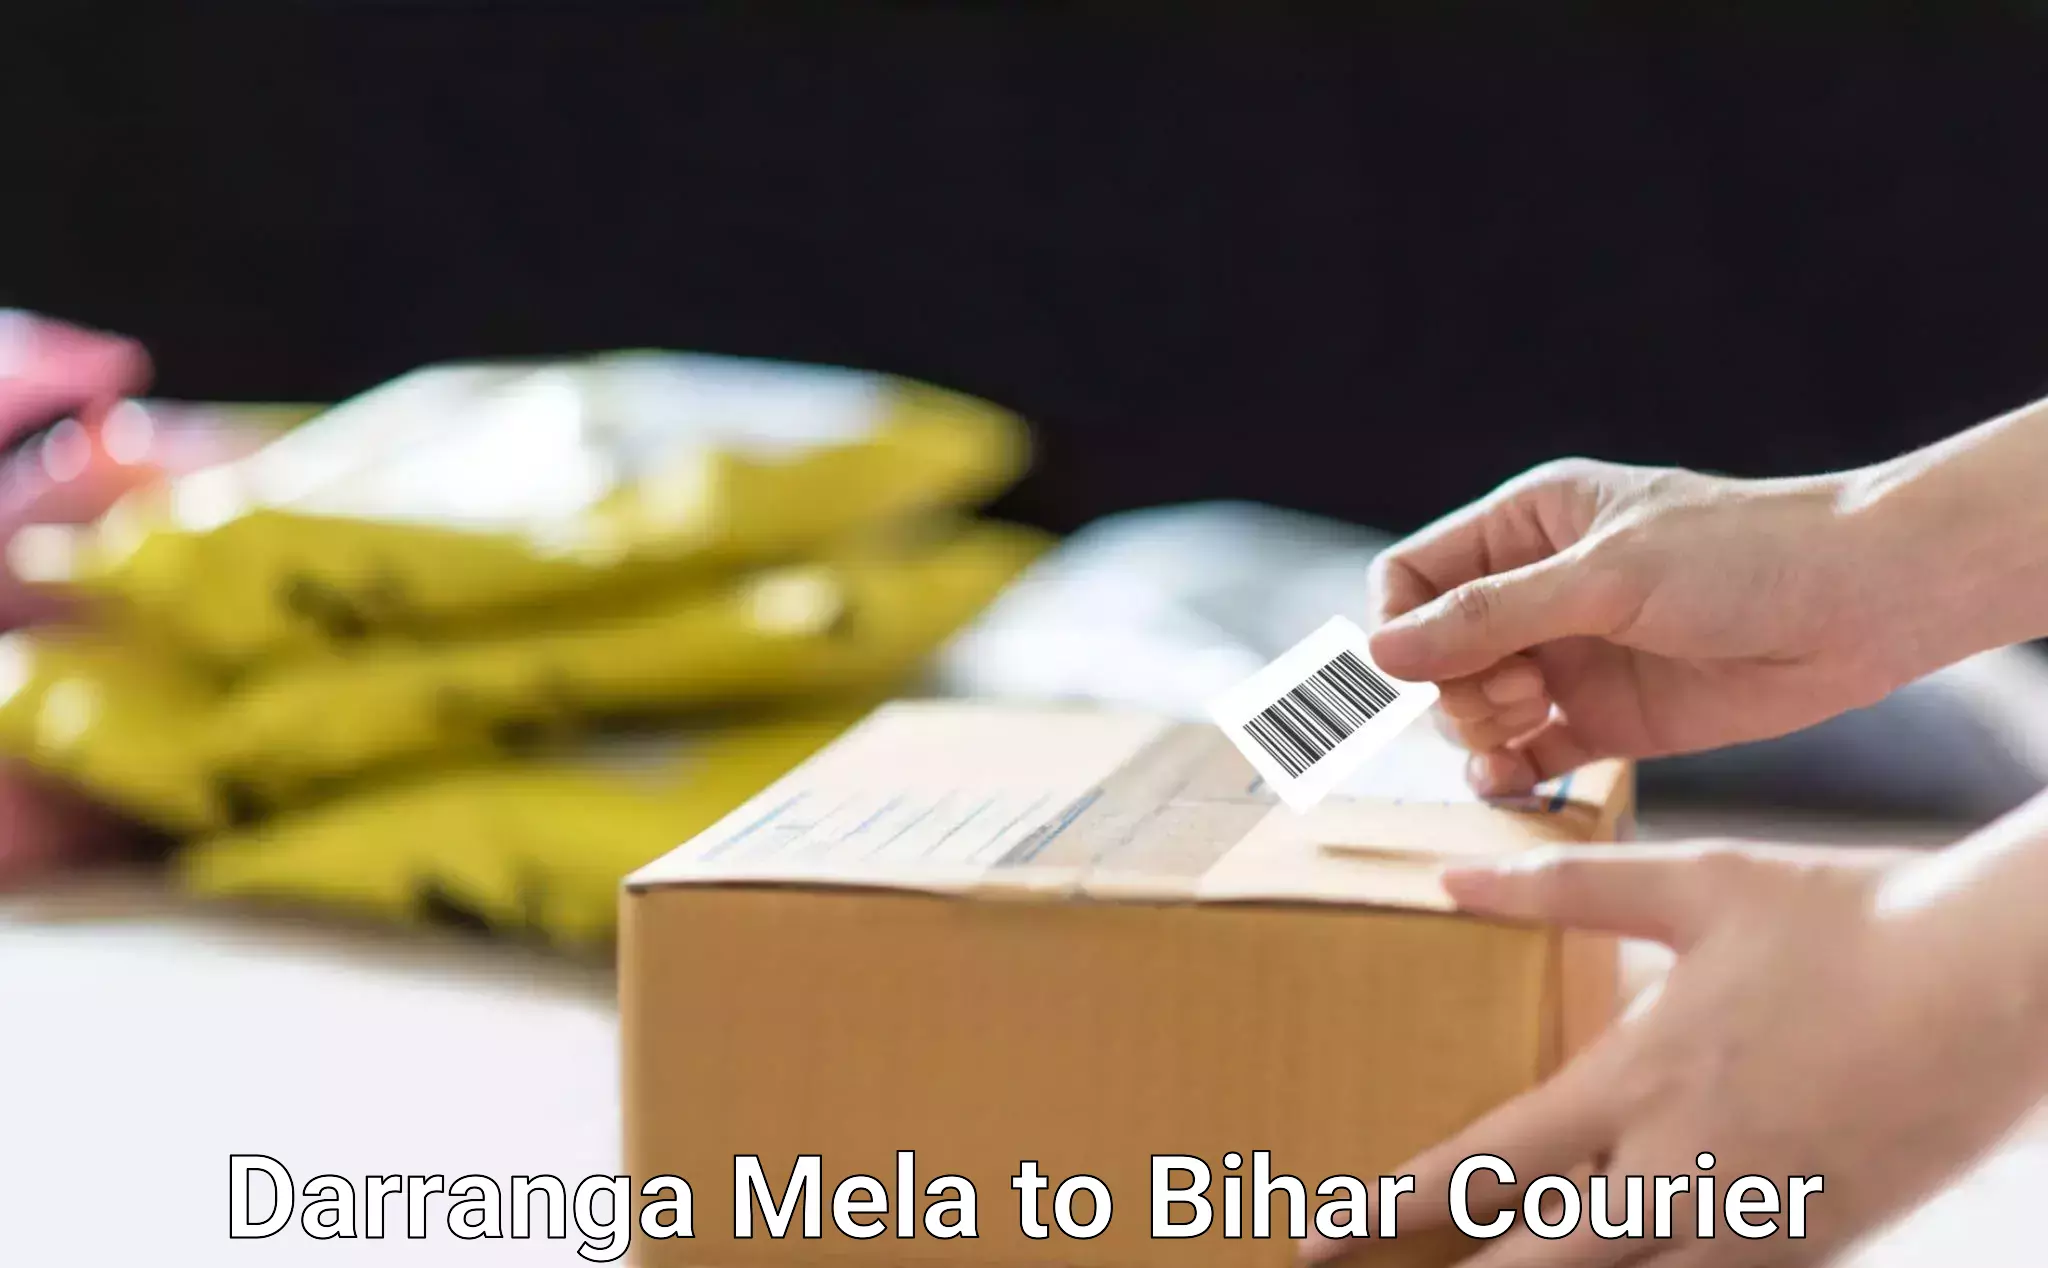 Express package services in Darranga Mela to Banka